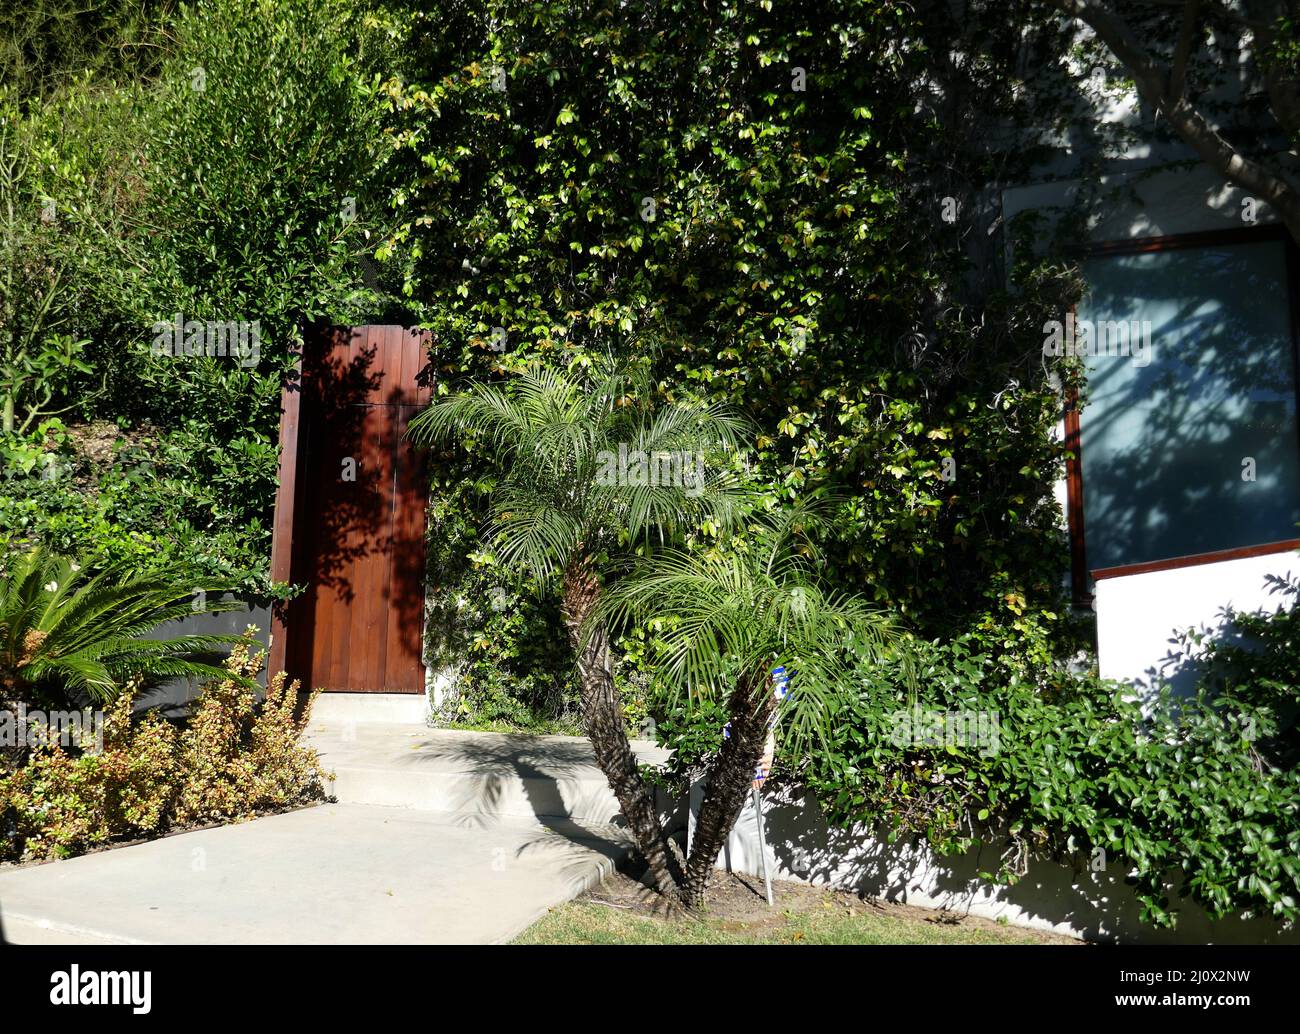 Beverly Hills, California, USA 12th March 2022 Actor Gregory Peck, Actor Boris Karloff and Actress Elizabeth Ashley's Former Home/House at 1426 Summitridge Drive on March 12, 2022 in Beverly Hills, California, USA. Photo by Barry King/Alamy Stock Photo Stock Photo